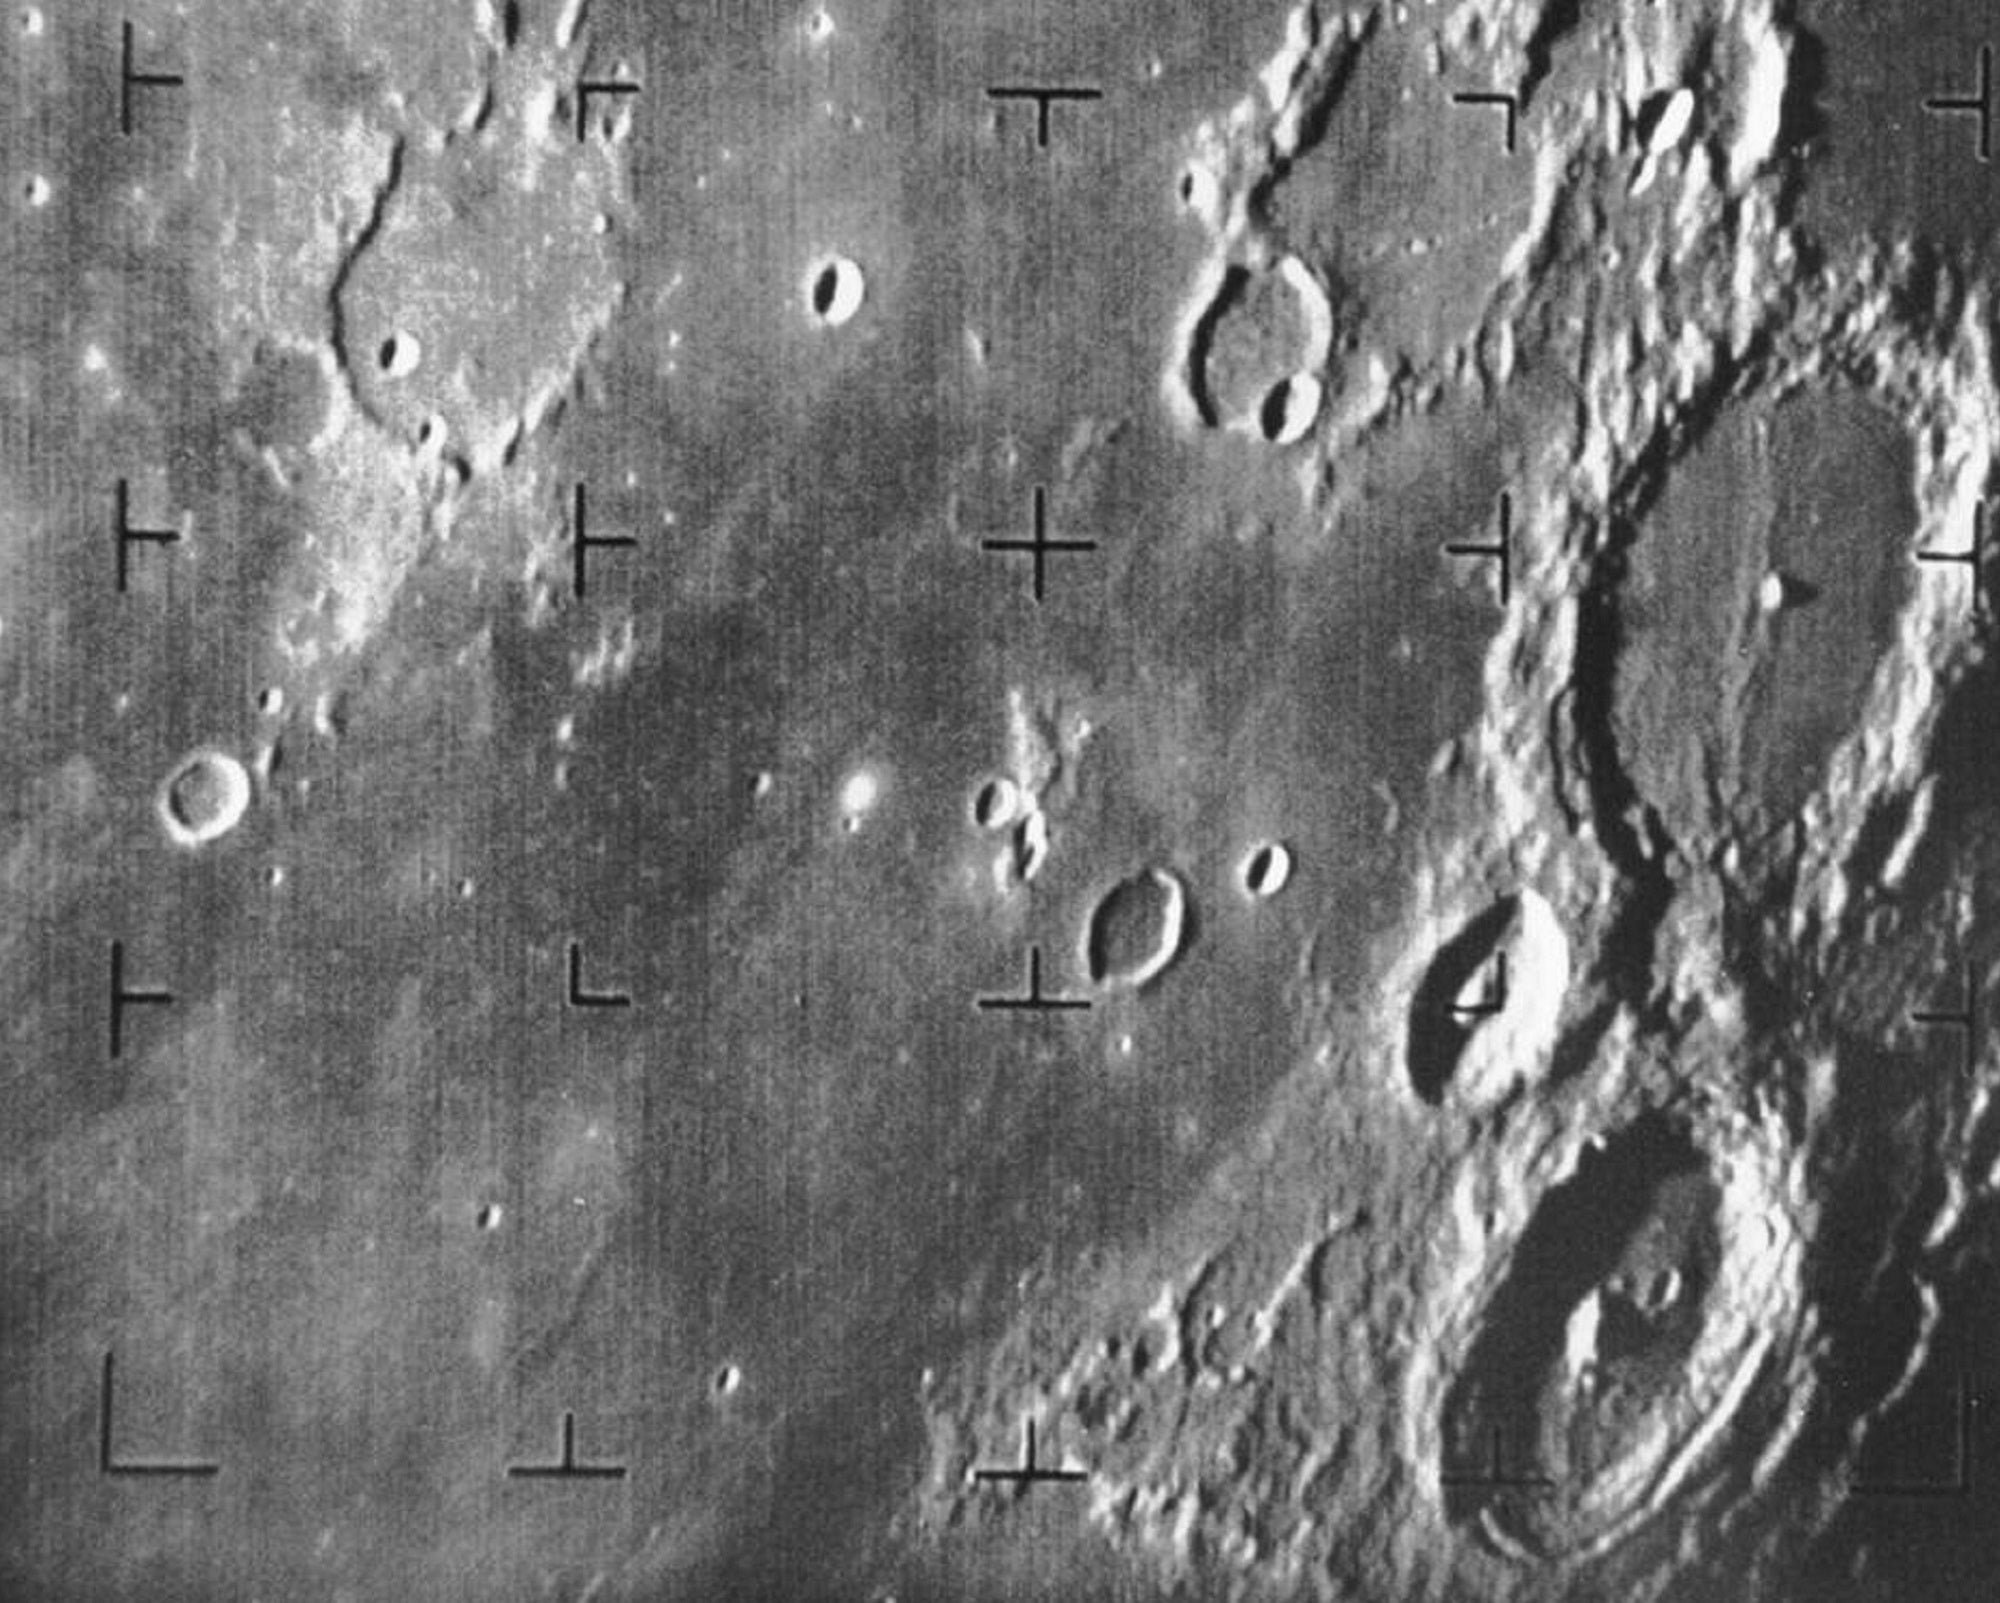 Moon craters in black and white image from Ranger 7 NASA space probe